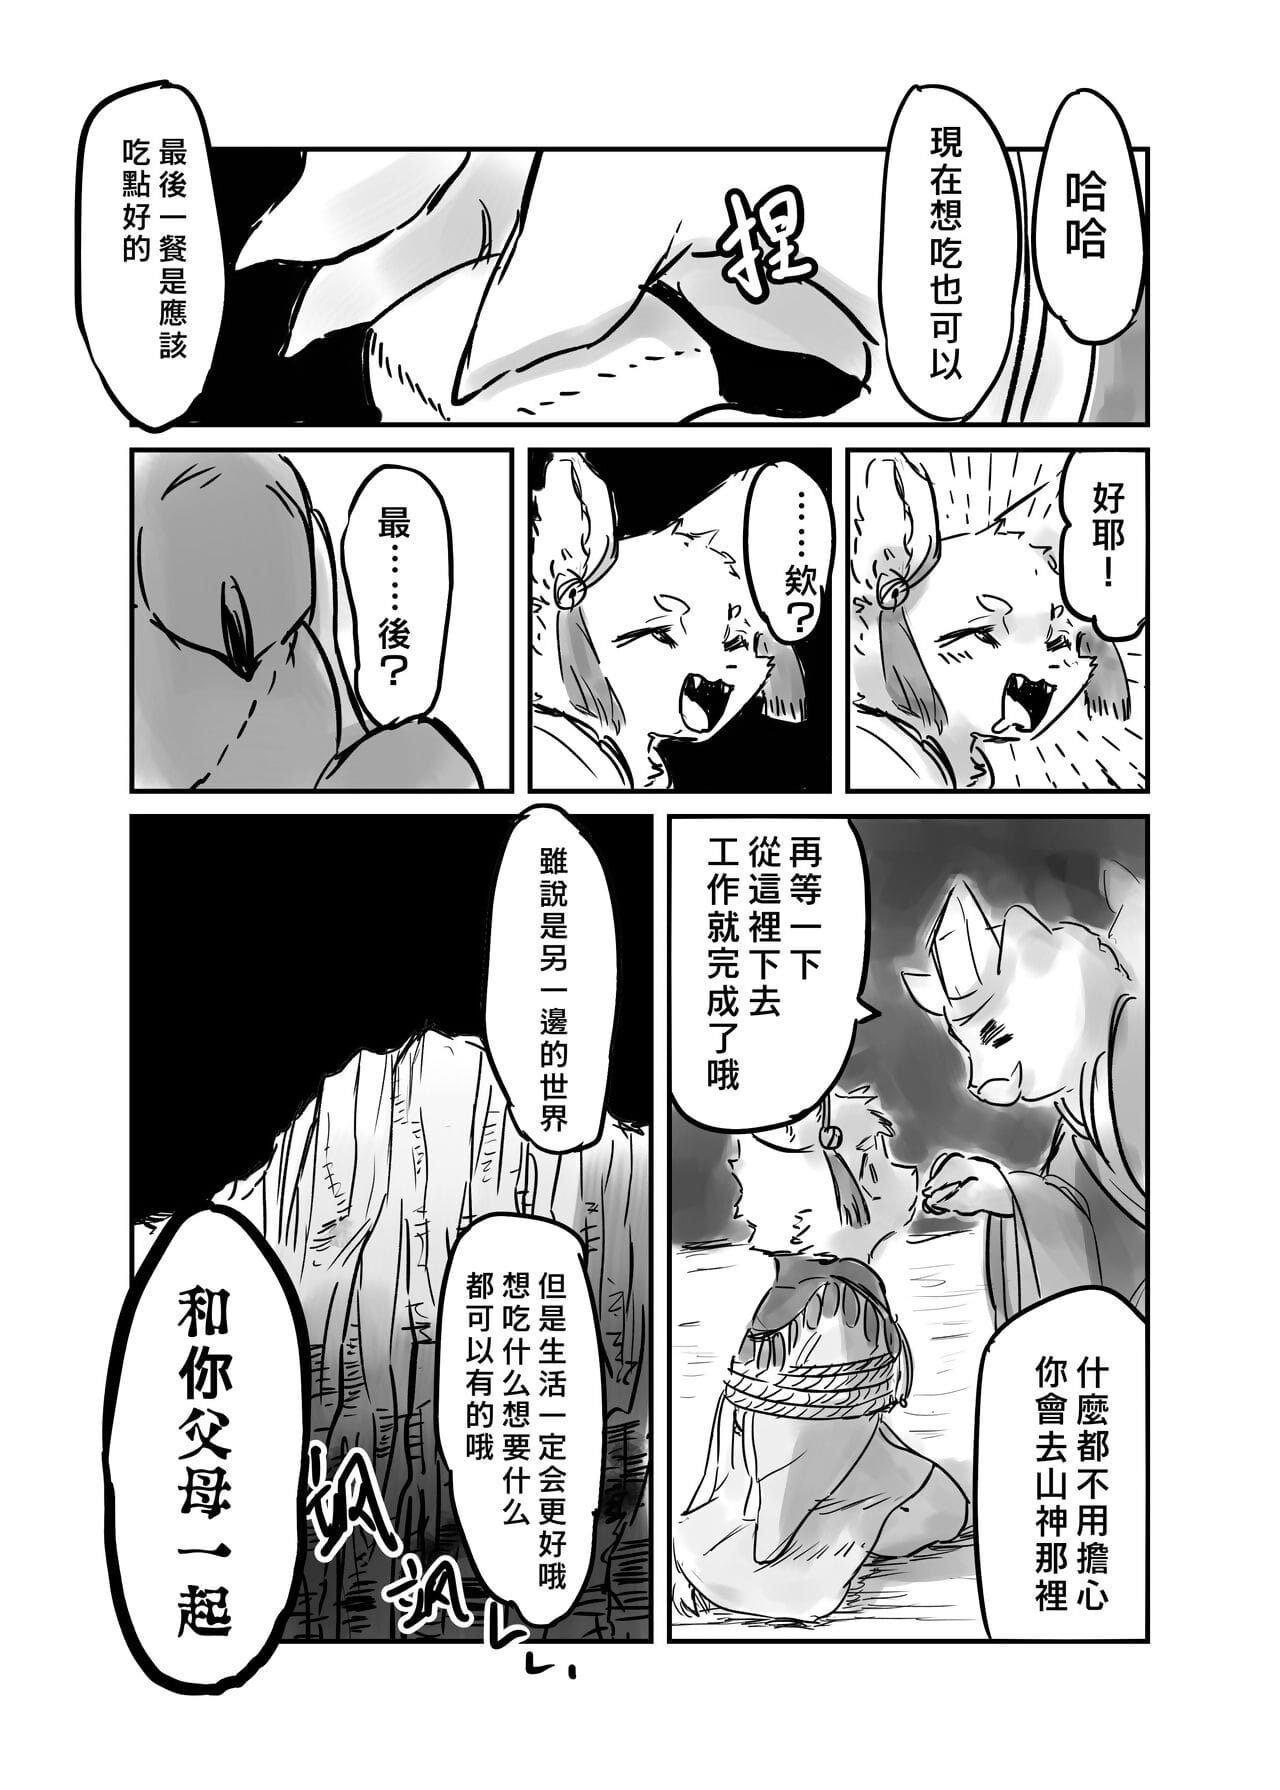 （the visitante 他乡之人 by：鬼流 Parte 3 page 1